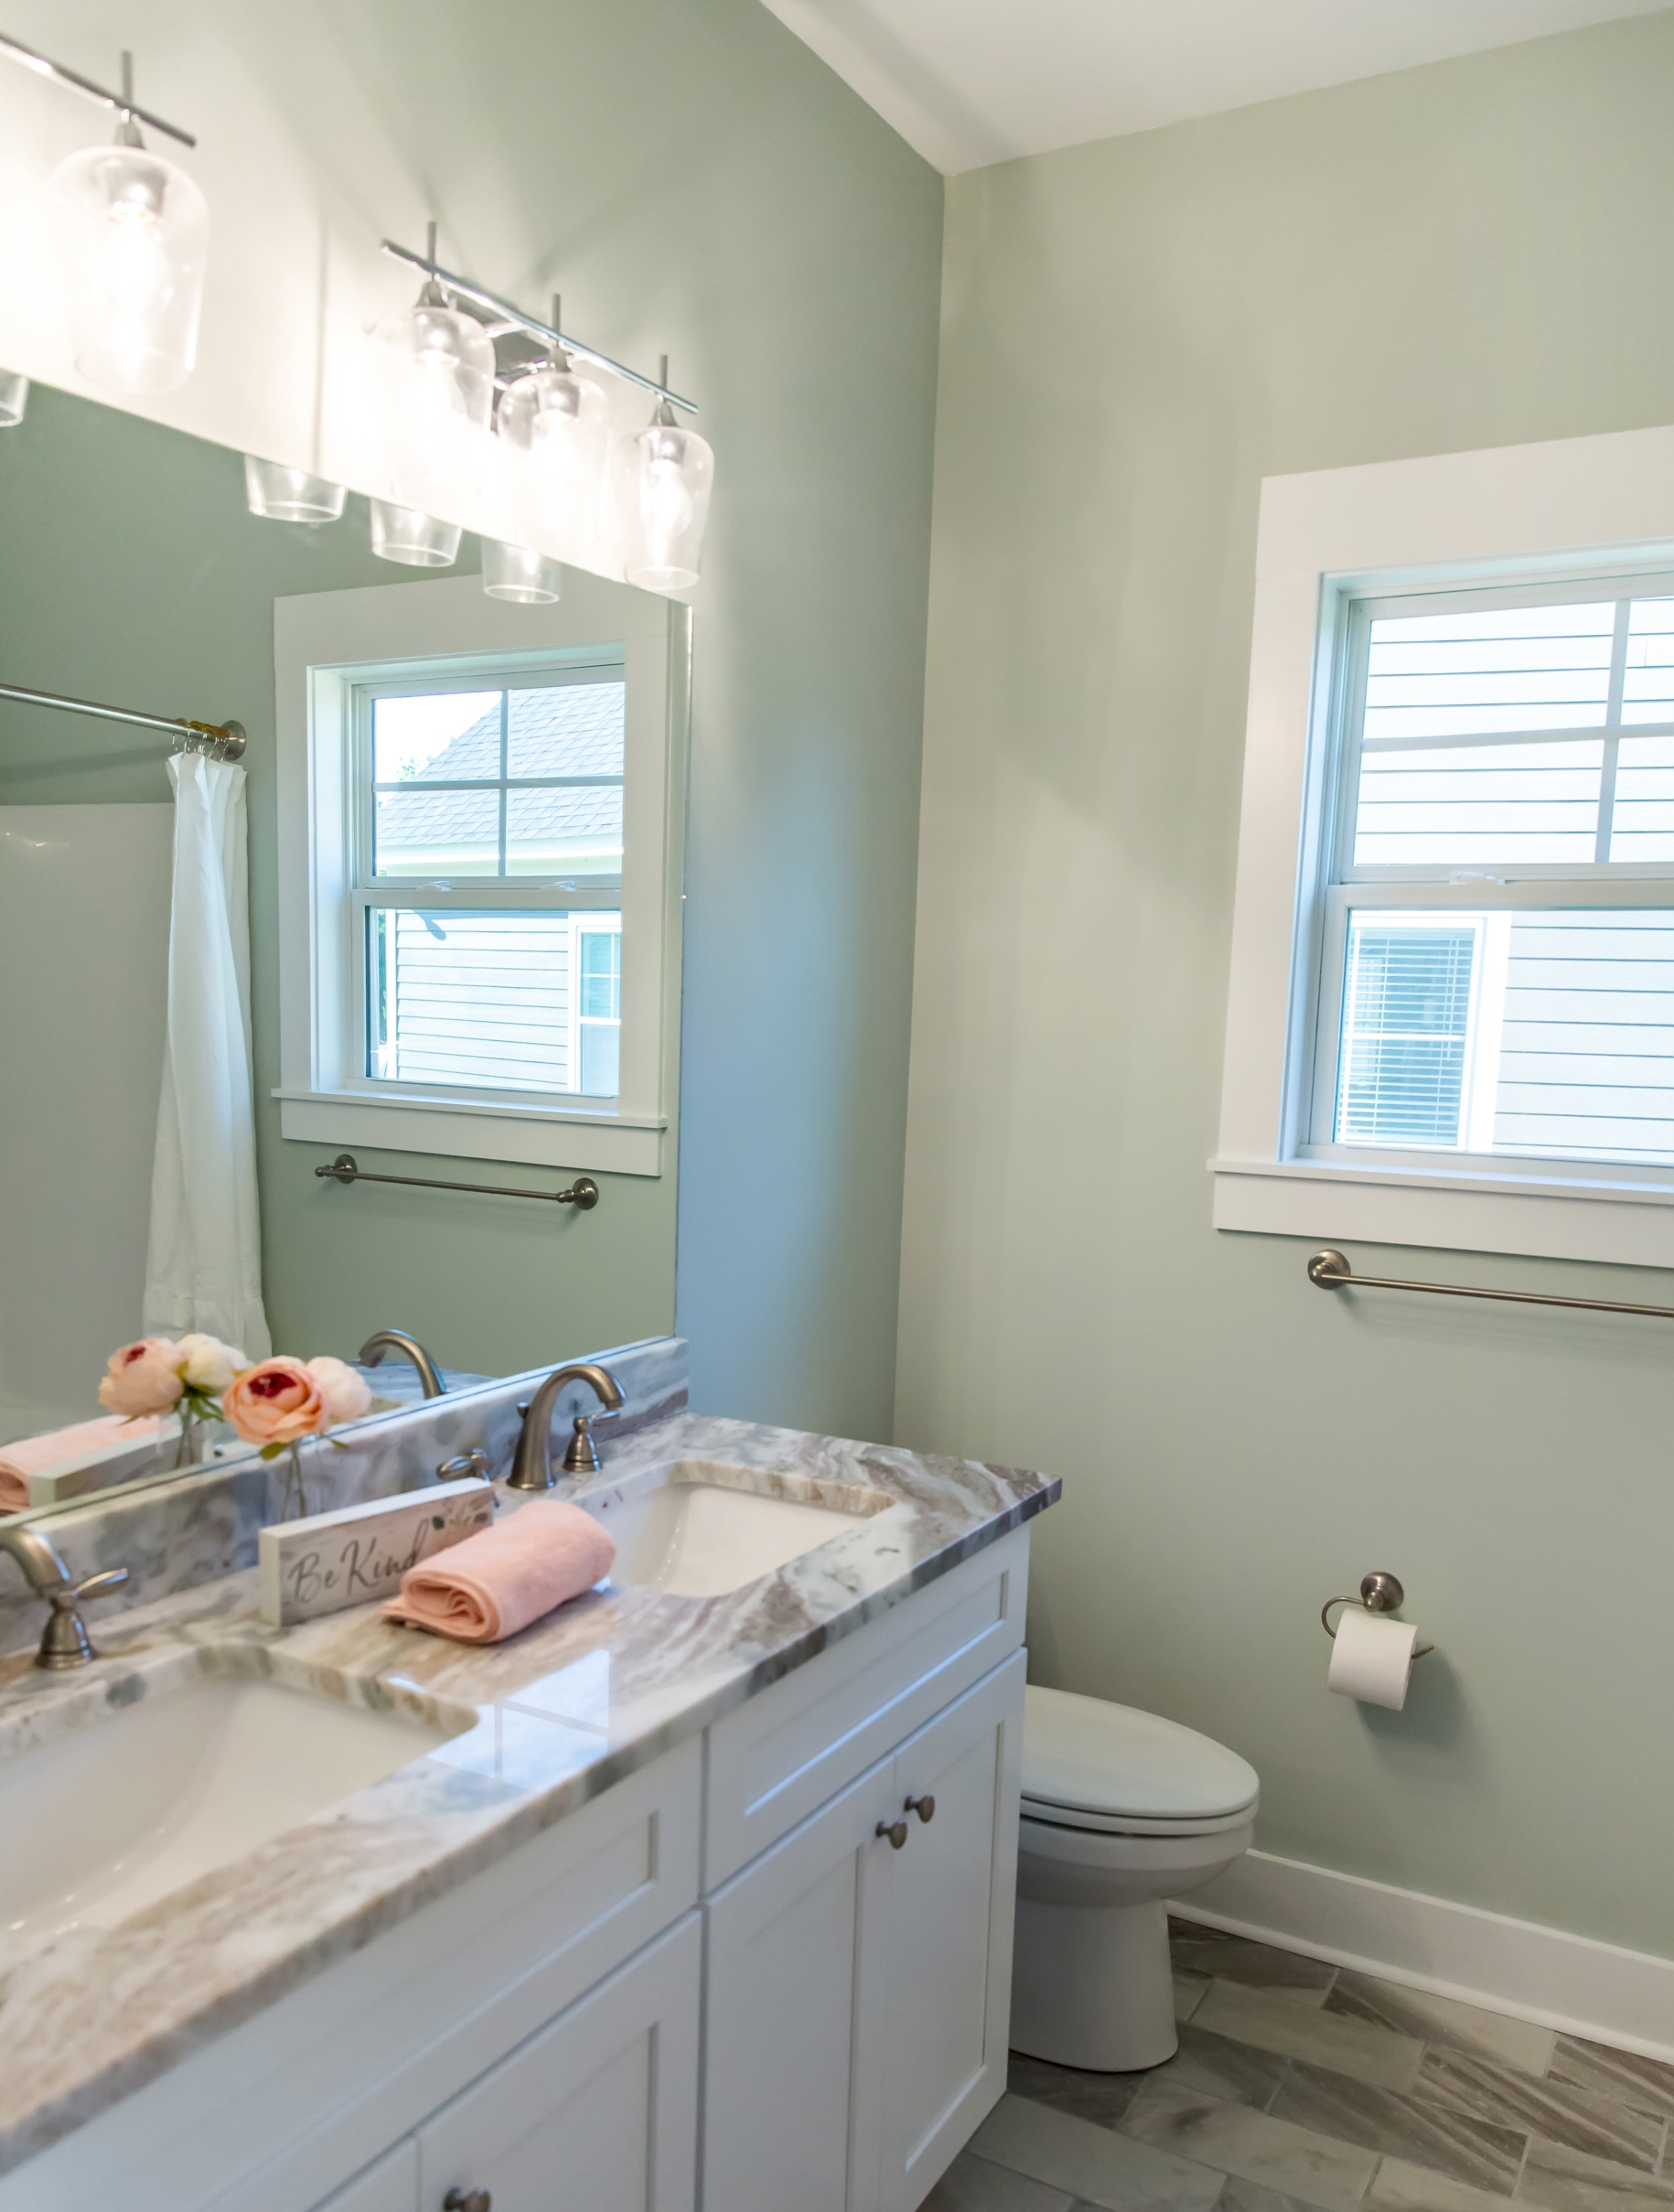 Minty green adds brightness and cheer to small bathrooms without overpowering the space.